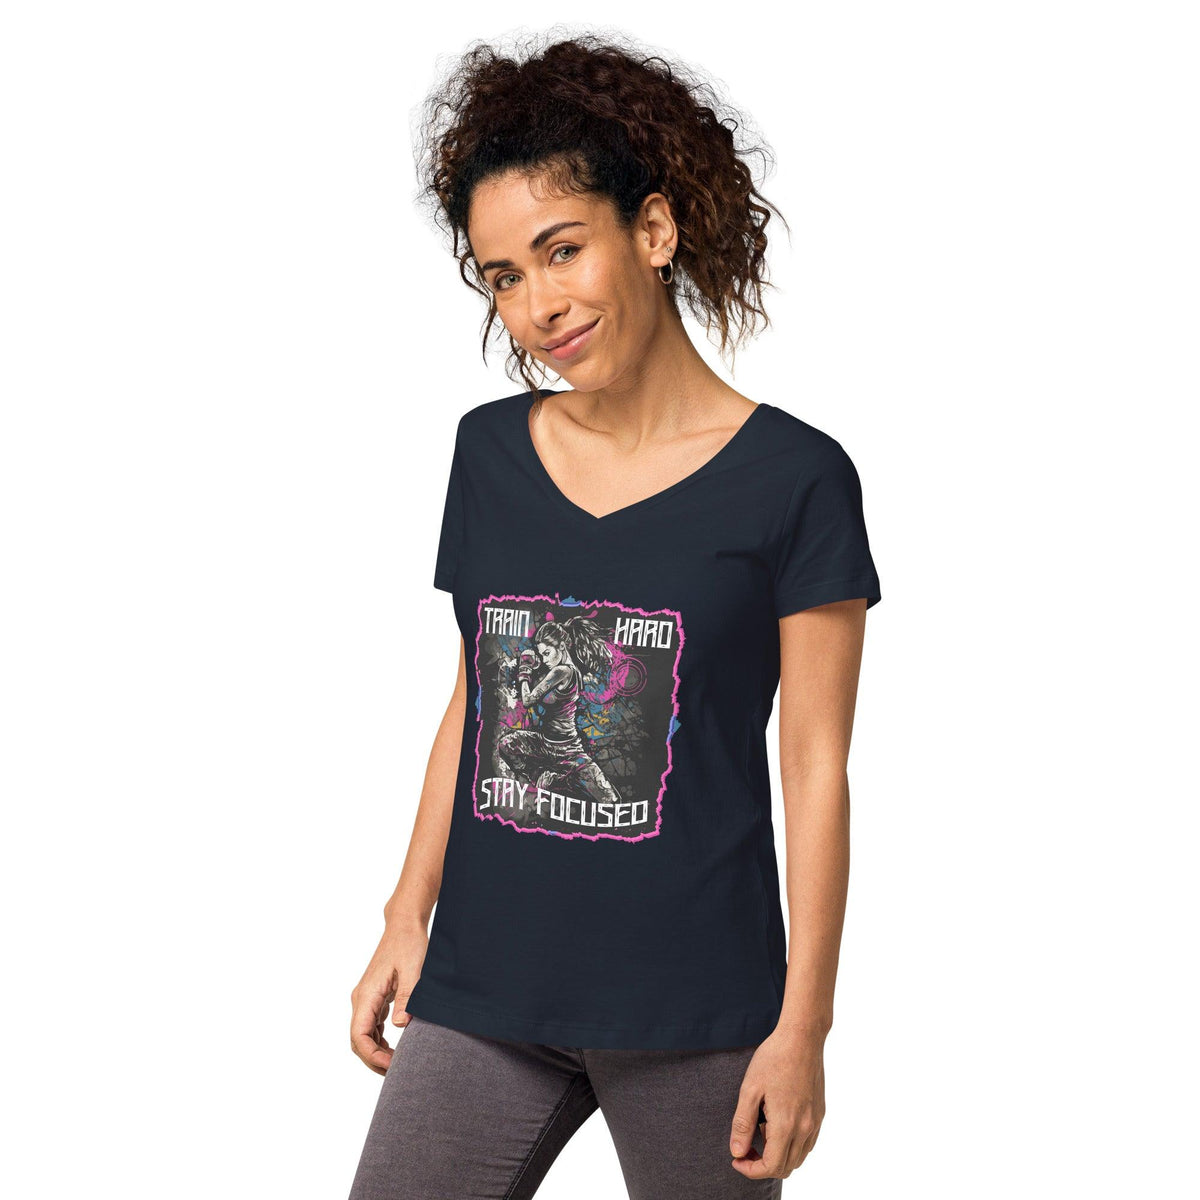 Train Hard Stay Focused Women’s Fitted V-neck T-shirt - Beyond T-shirts